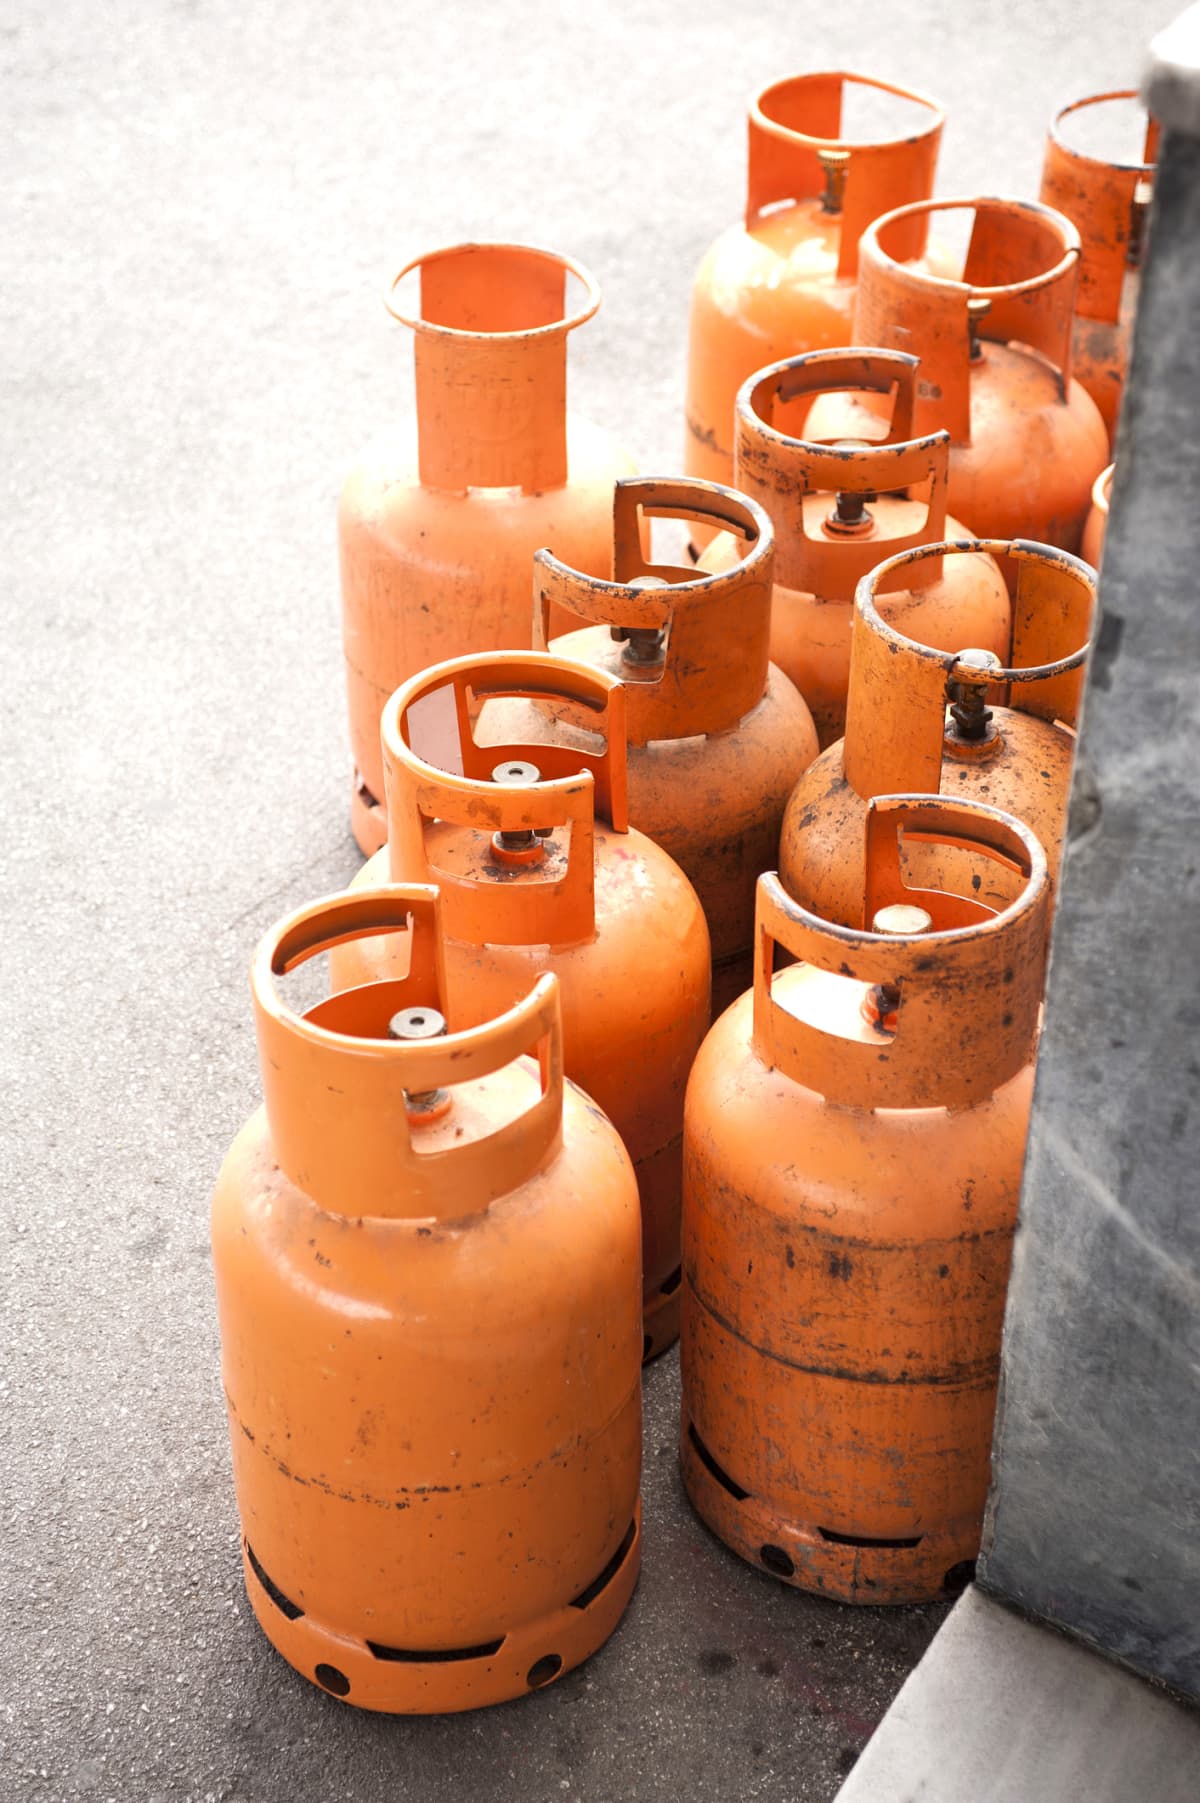 Domestic propane gas bottles ready to be refilled and recycled